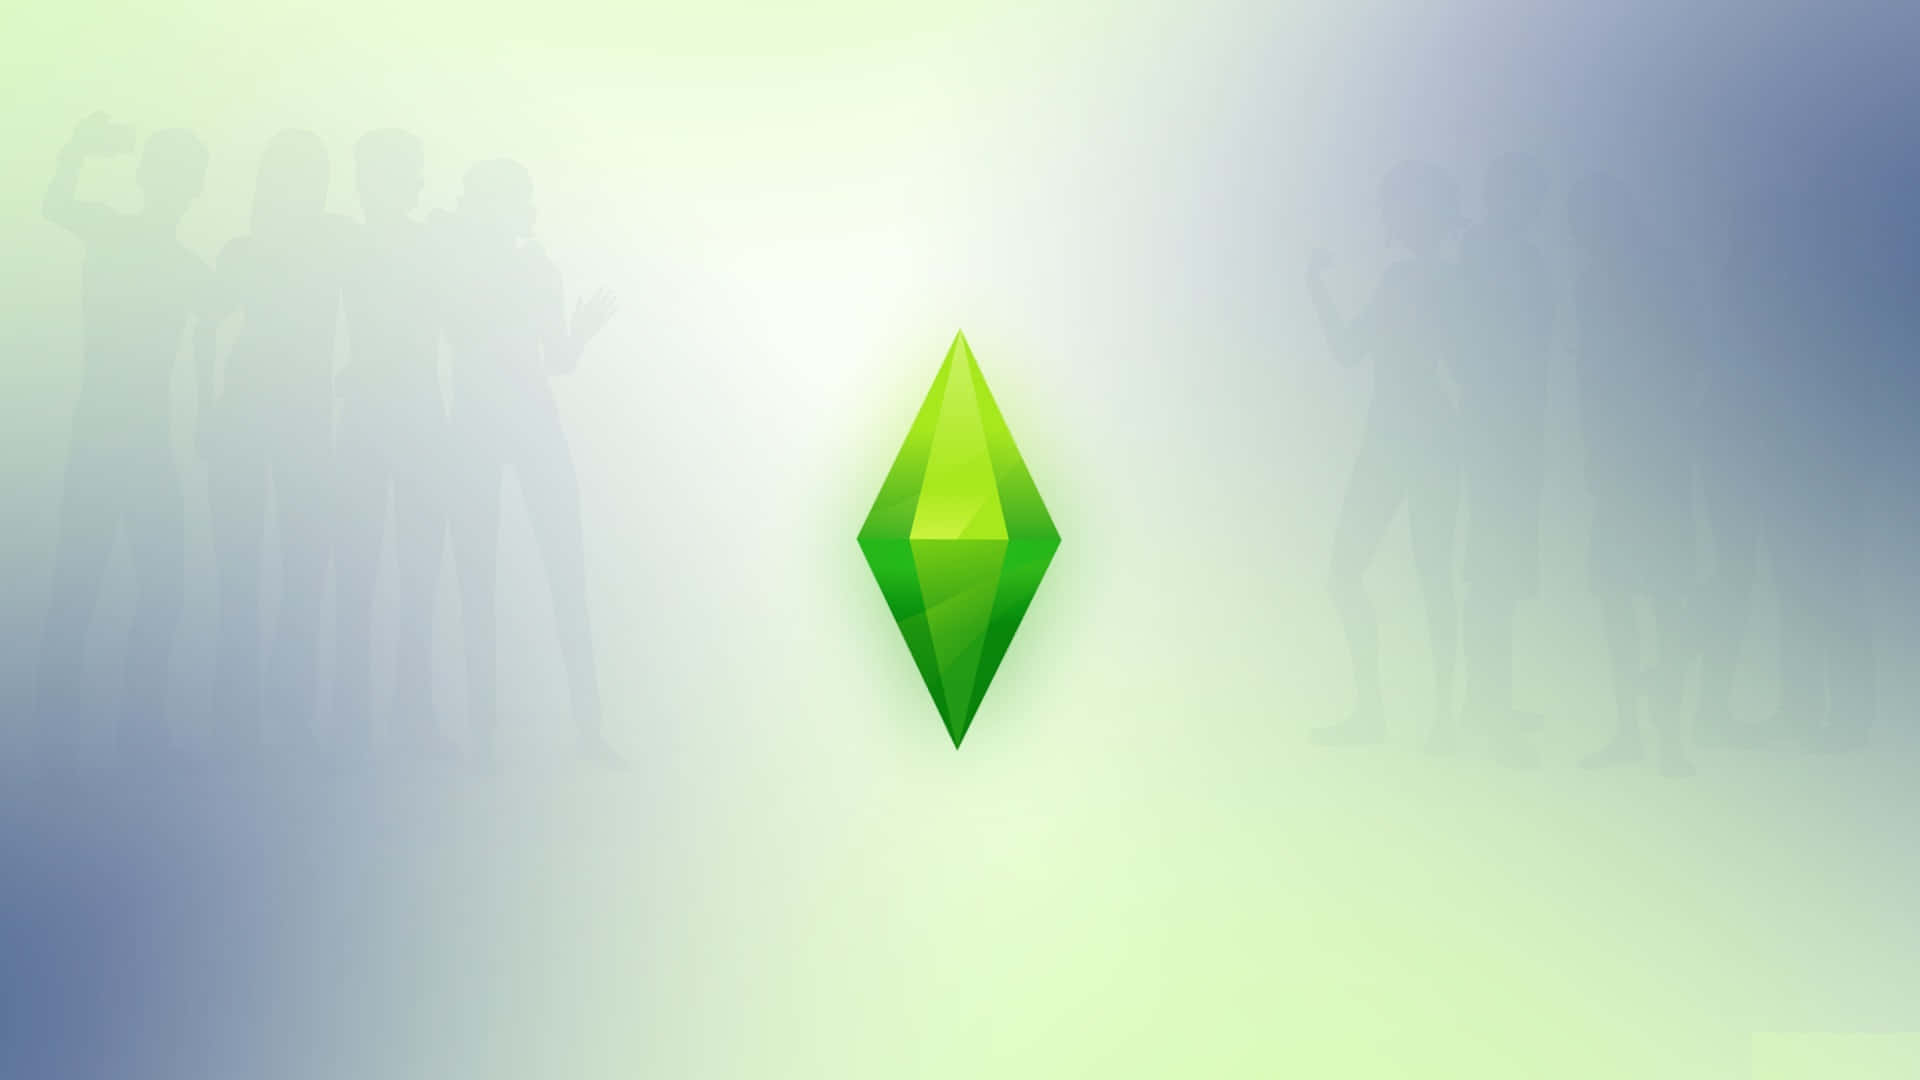 The Sims 4 HD Wallpaper featuring a group of eccentric and lively characters Wallpaper